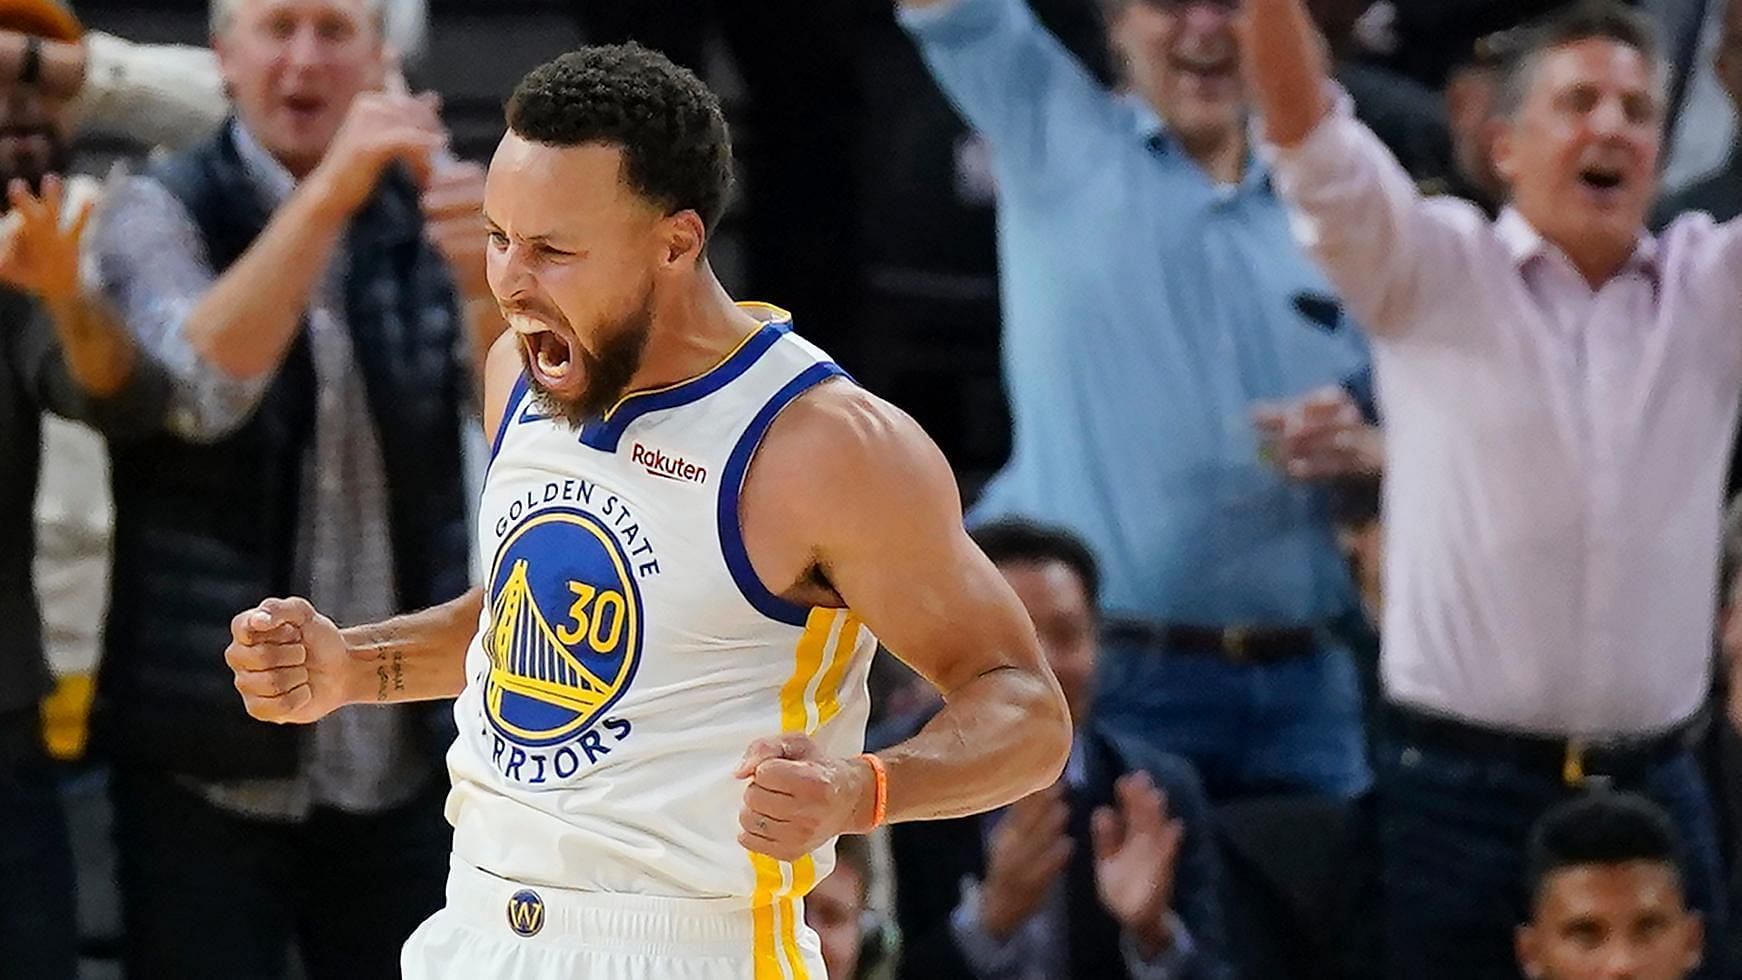 GamerCityNews faae8-16669536397325-1920 “When he gets into that mode, it’s like a video game, that’s why he’s one of the GOATs” – GSW All-Star gushes about Stephen Curry’s match-winning performance against Miami Heat 